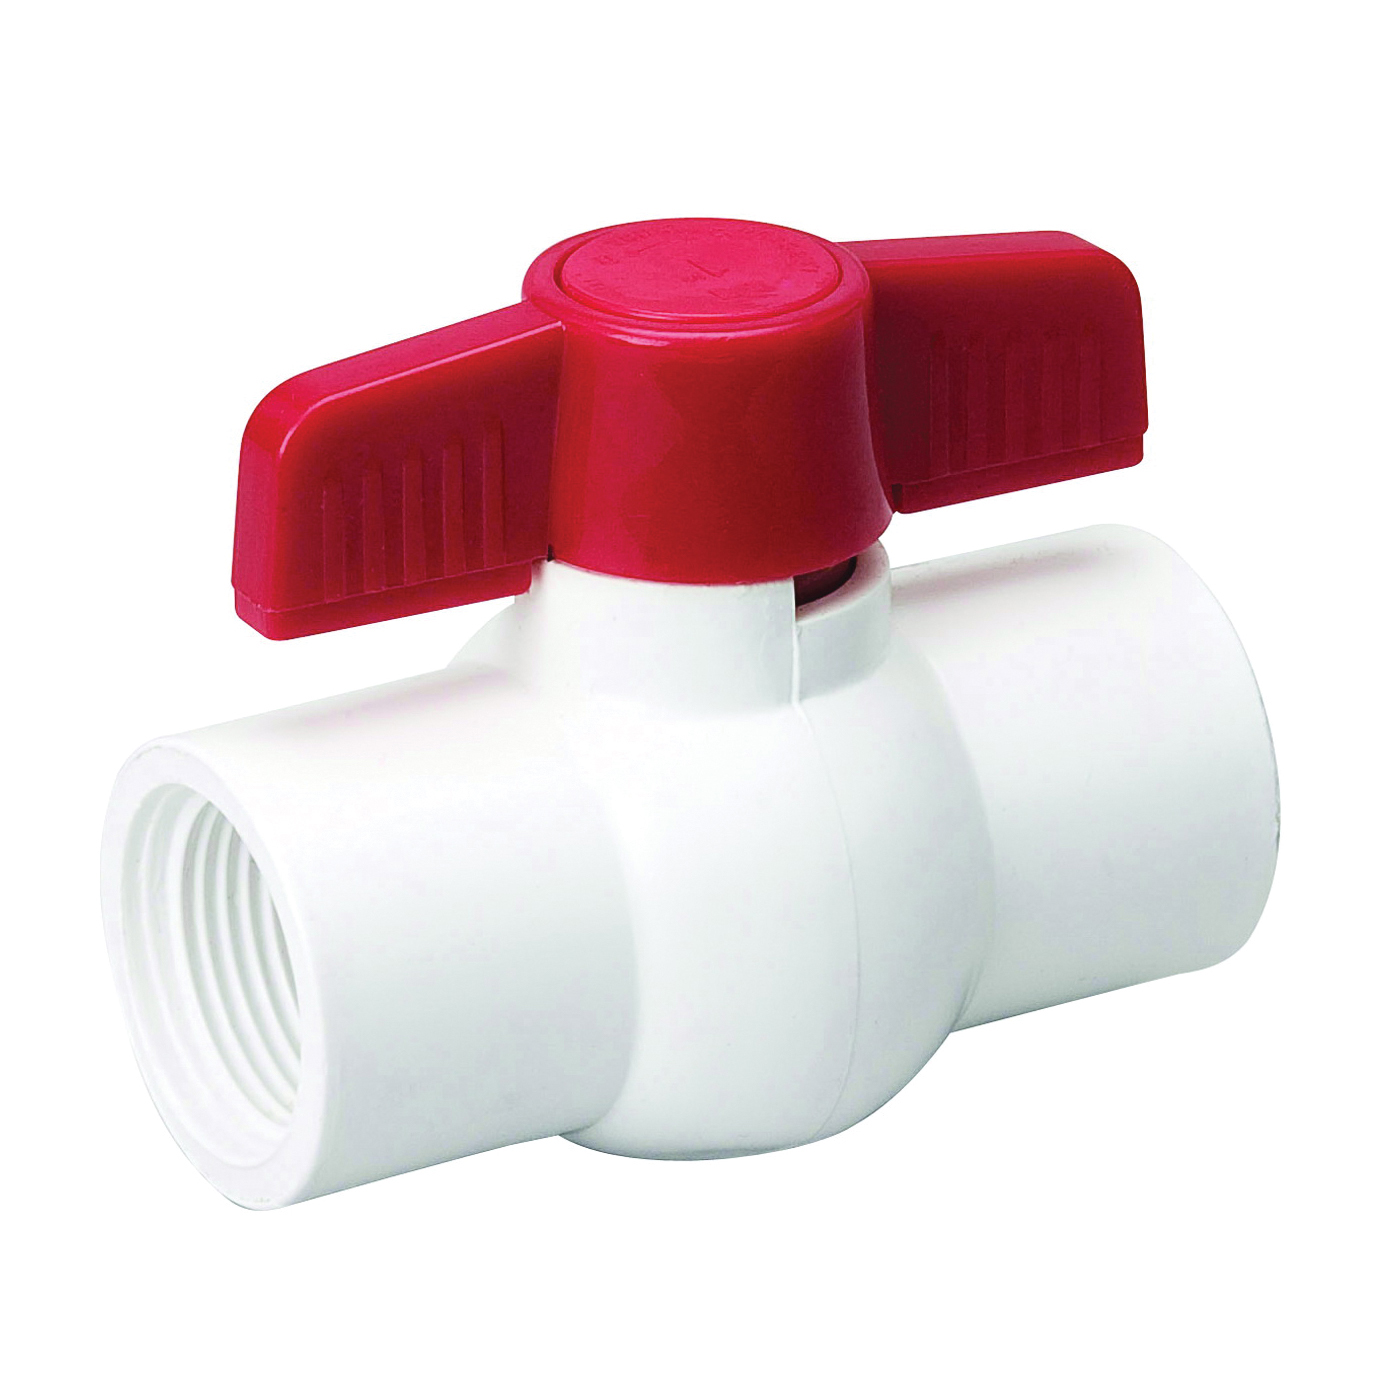 107-136HC Ball Valve, 1-1/4 in Connection, FPT x FPT, 150 psi Pressure, PVC Body